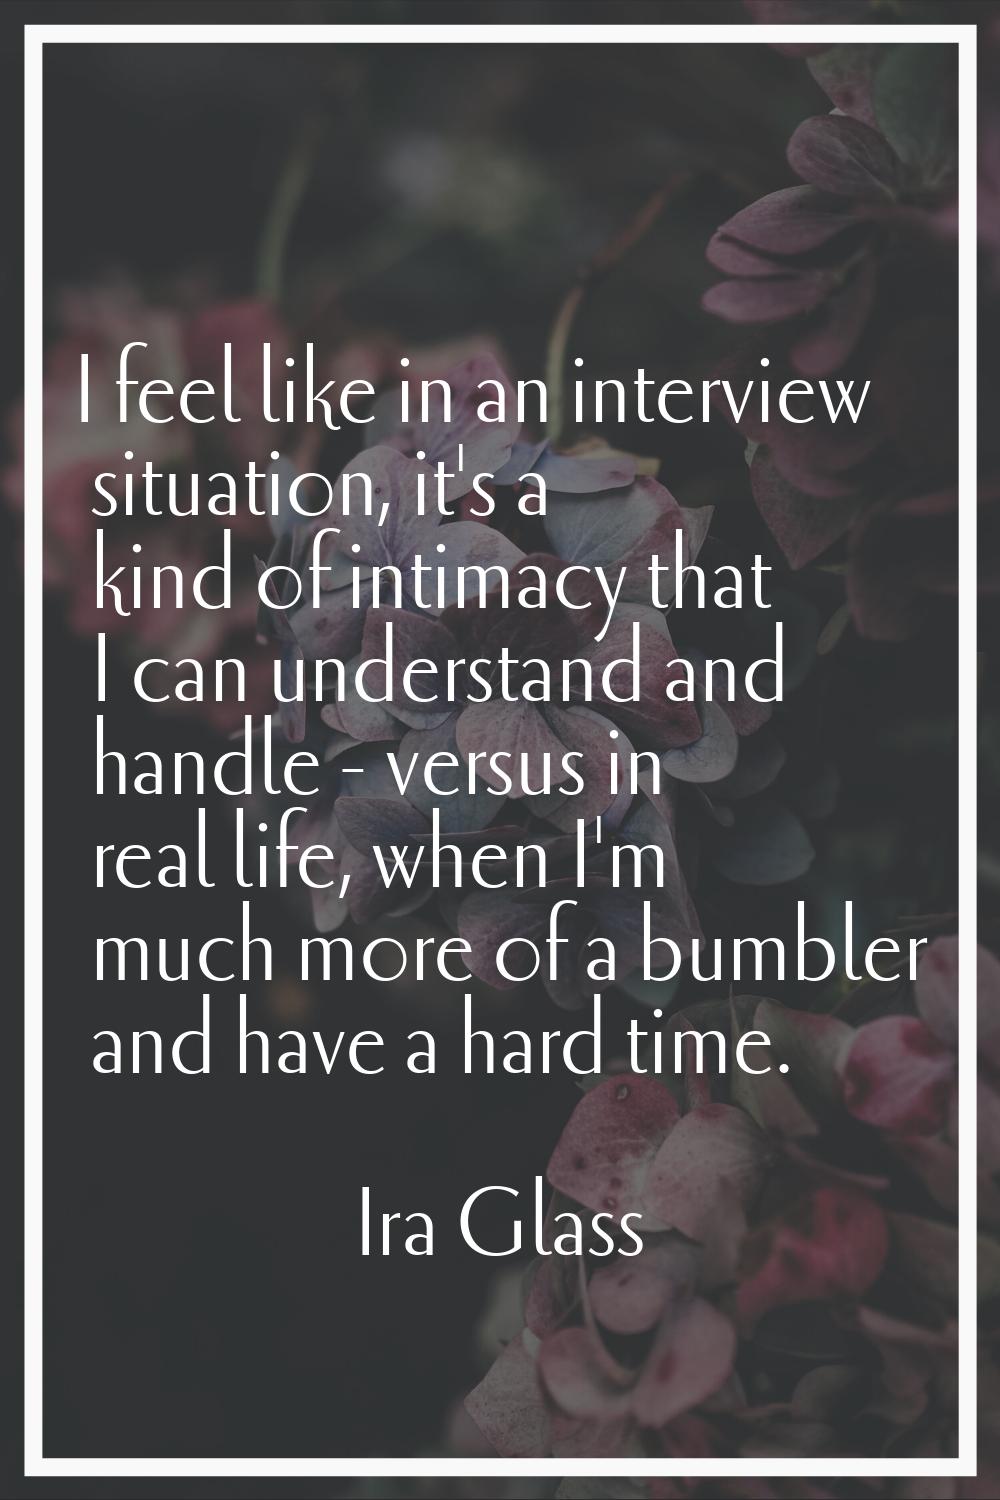 I feel like in an interview situation, it's a kind of intimacy that I can understand and handle - v